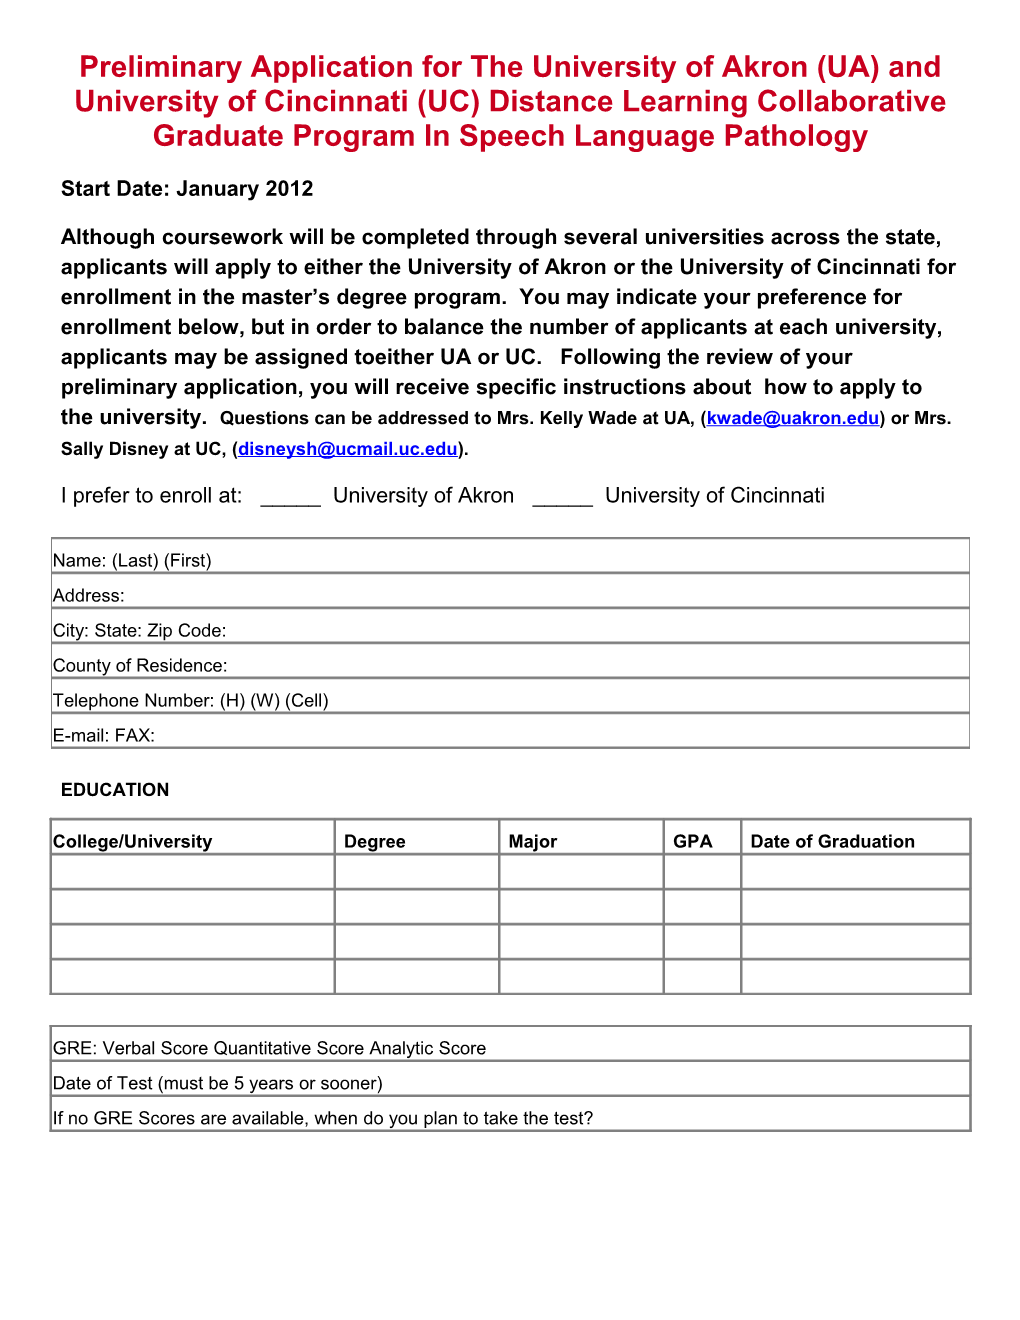 Preliminary Applicationfor the University of Akron (UA) and University of Cincinnati (UC)